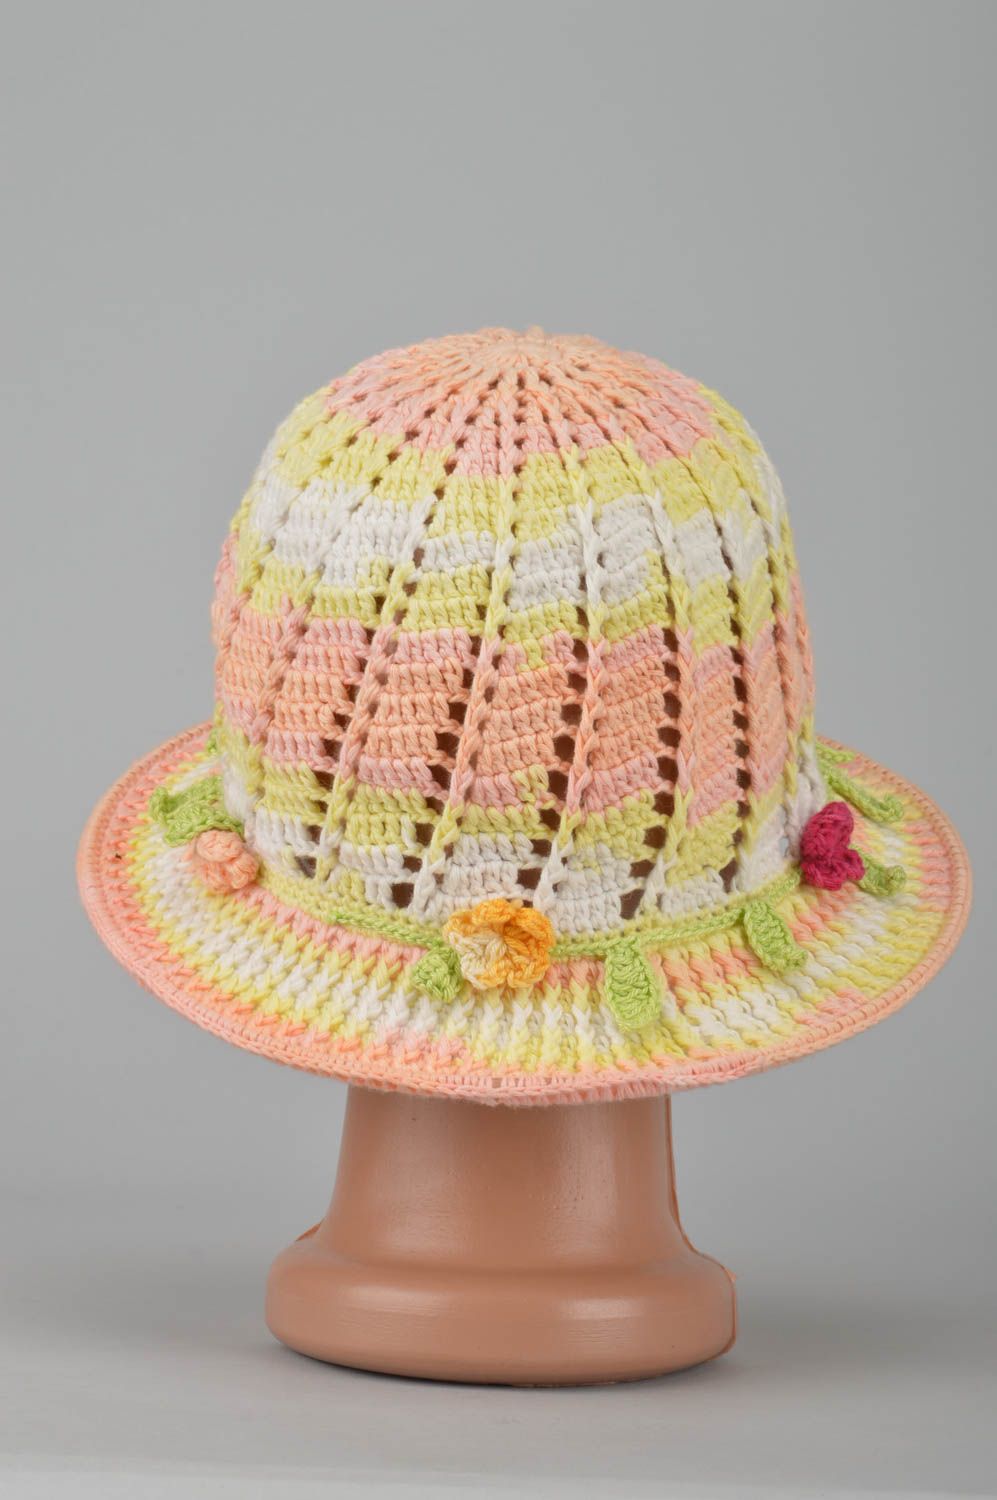 Handmade crochet hat hats for kids summer hat kids accessories gifts for girl photo 5